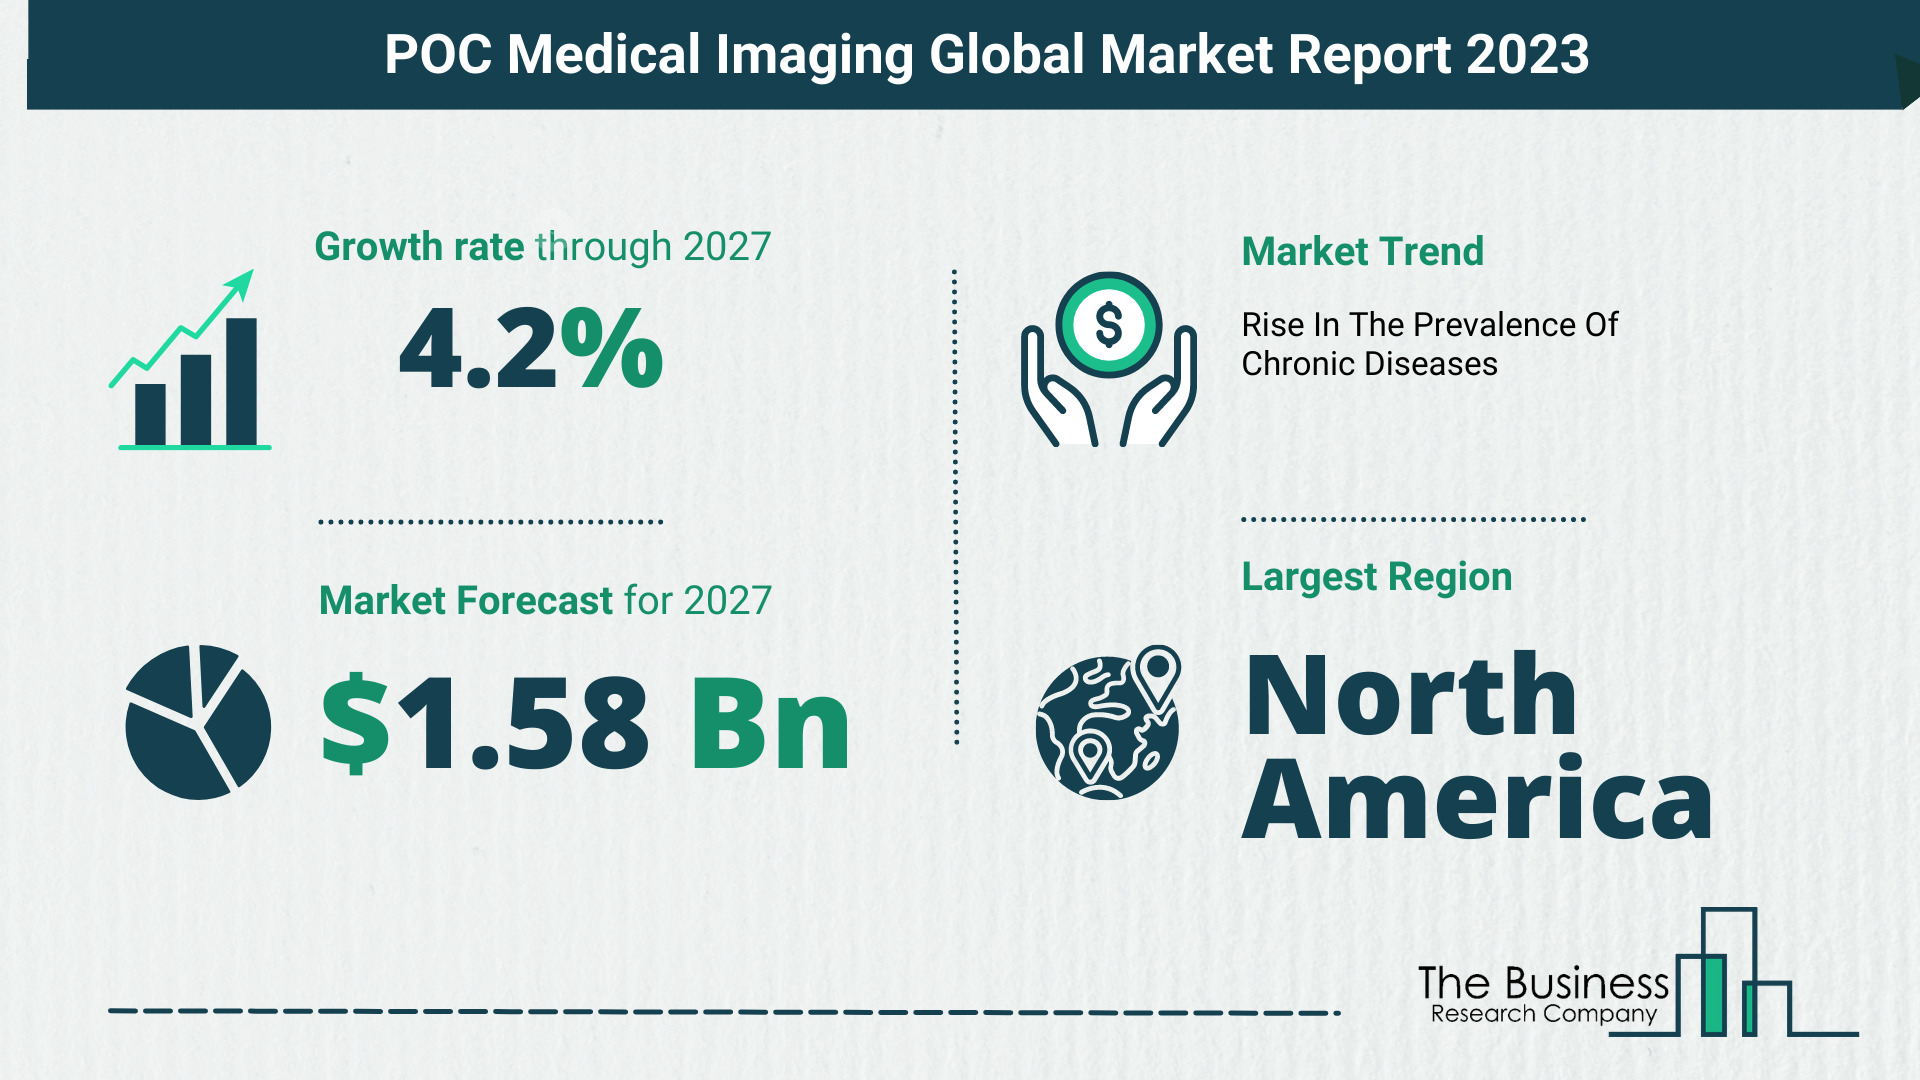 How Will The POC Medical Imaging Market Globally Expand In 2023?